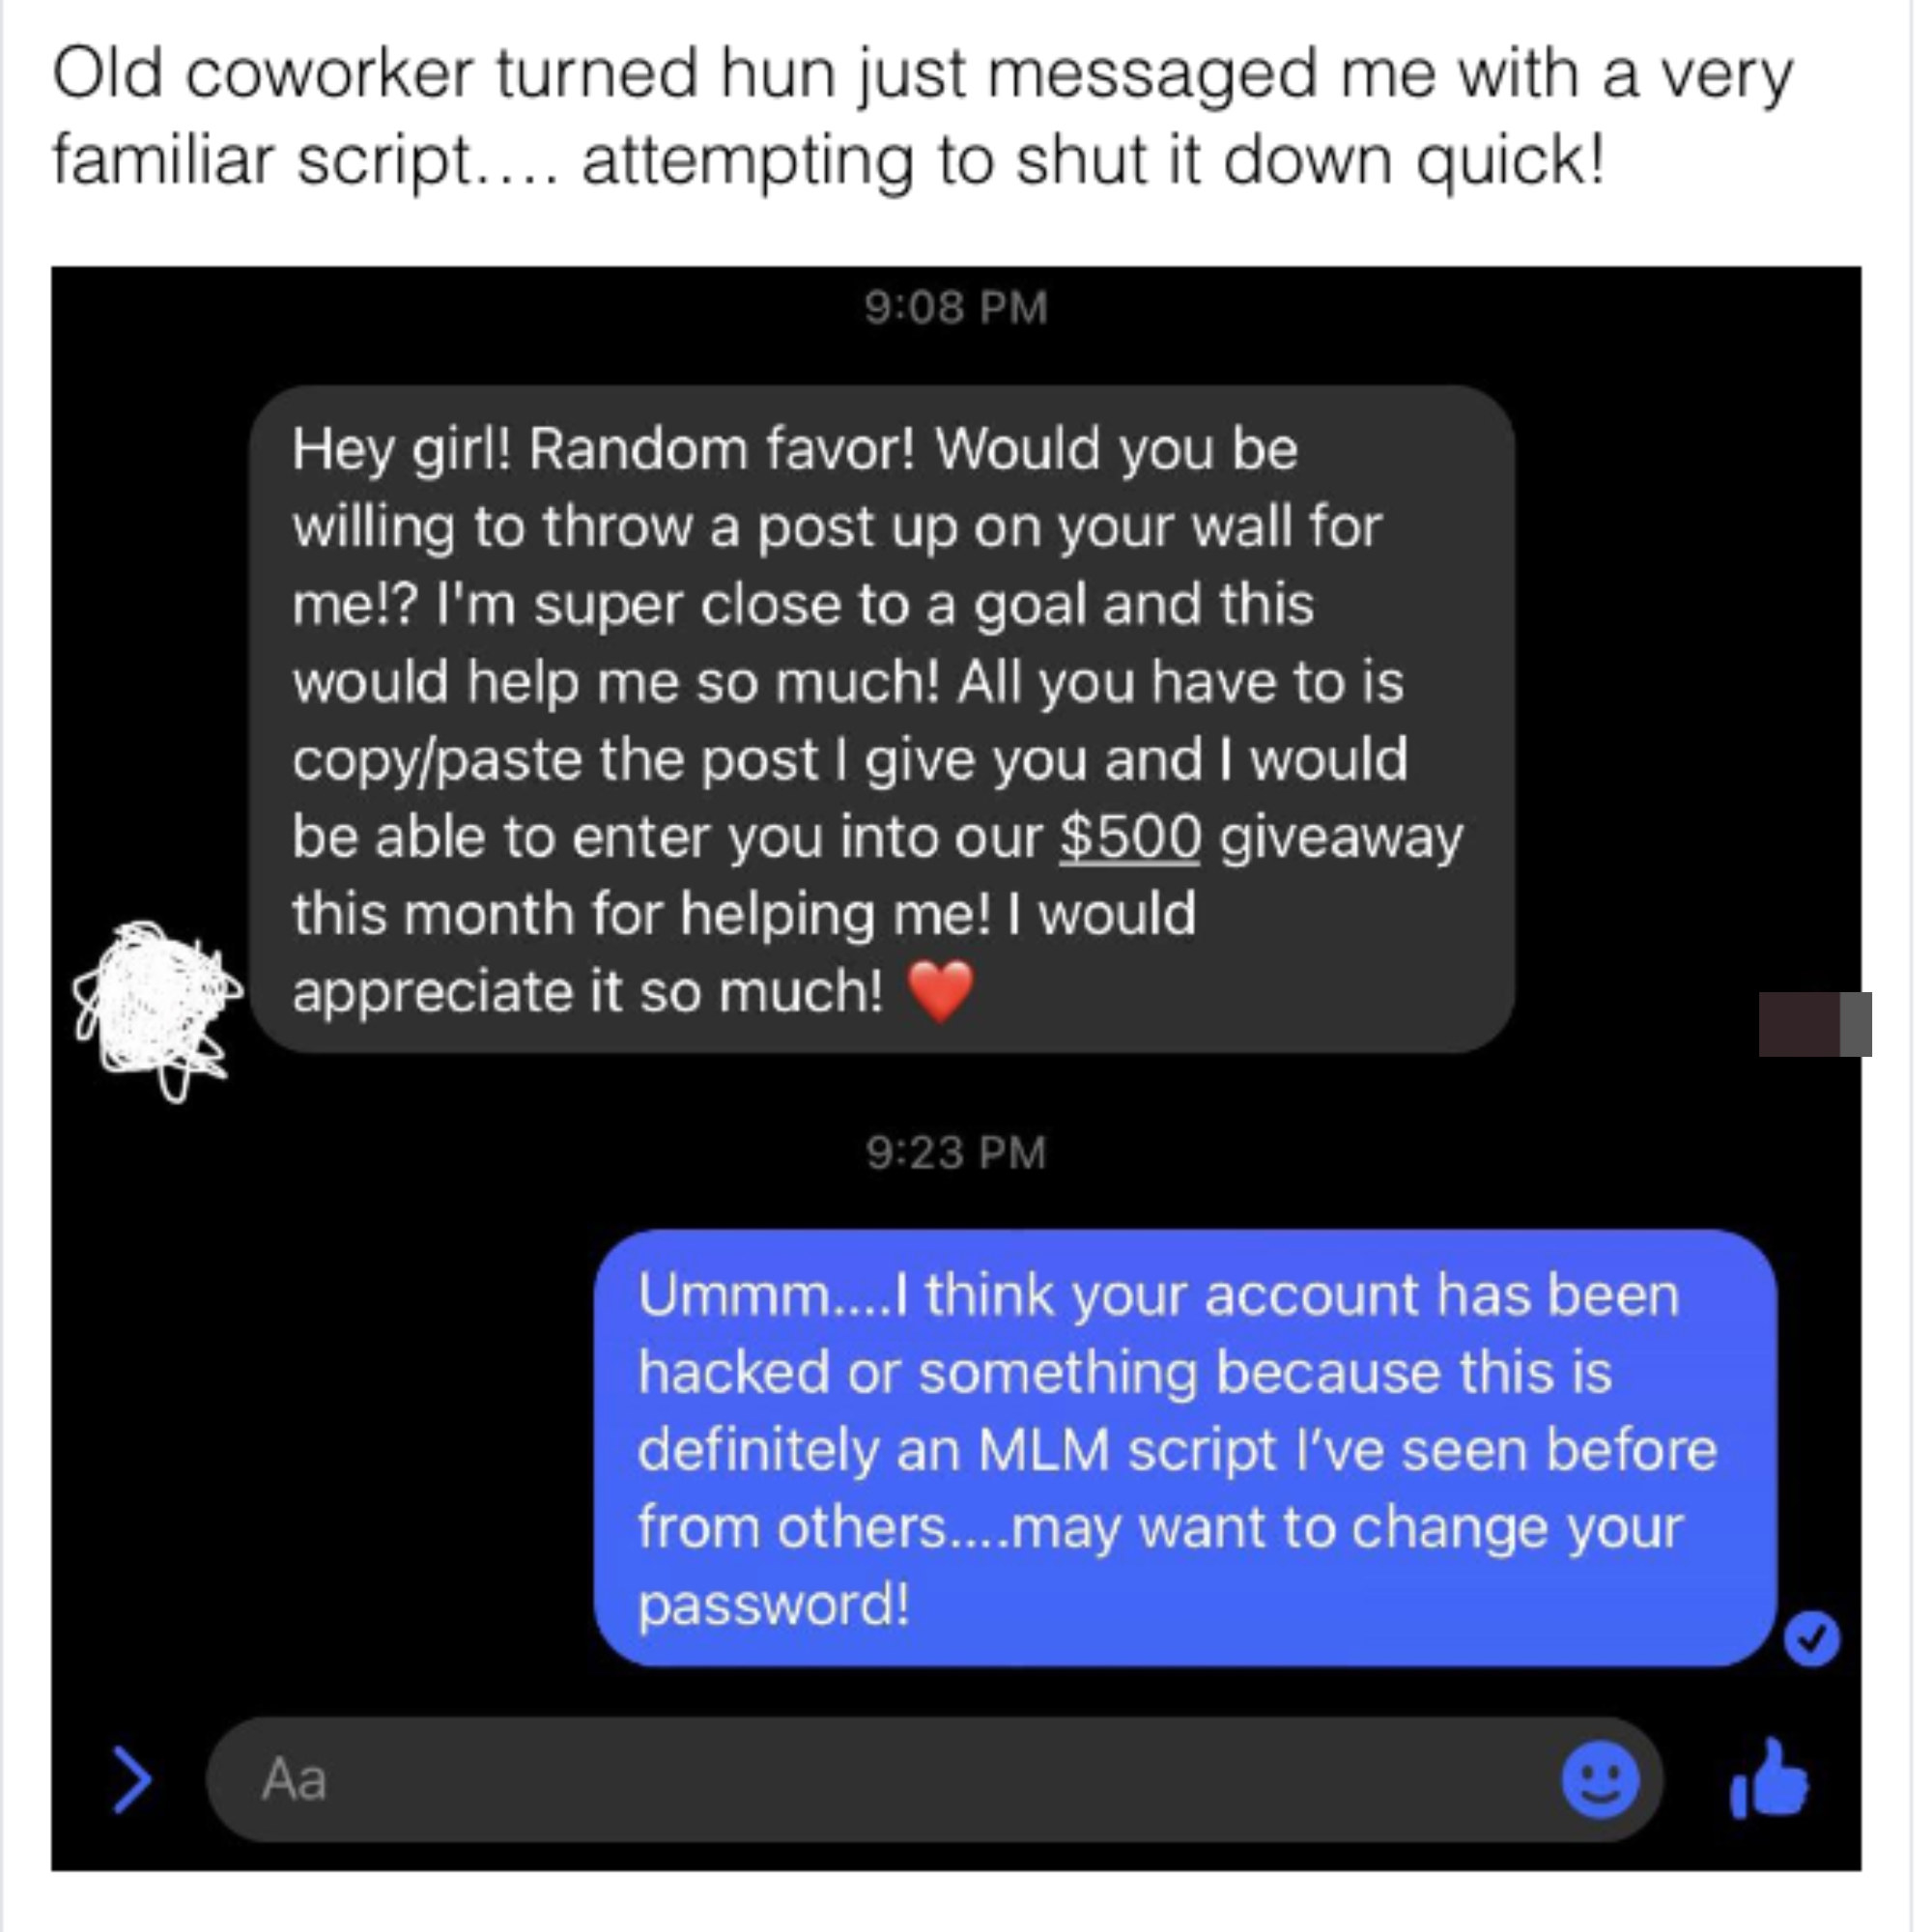 In response to text asking if they can copy/paste a post on their wall and they&#x27;ll be entered in a $500 giveaway with &quot;I think your account has been hacked because this is definitely an MLM script&quot;